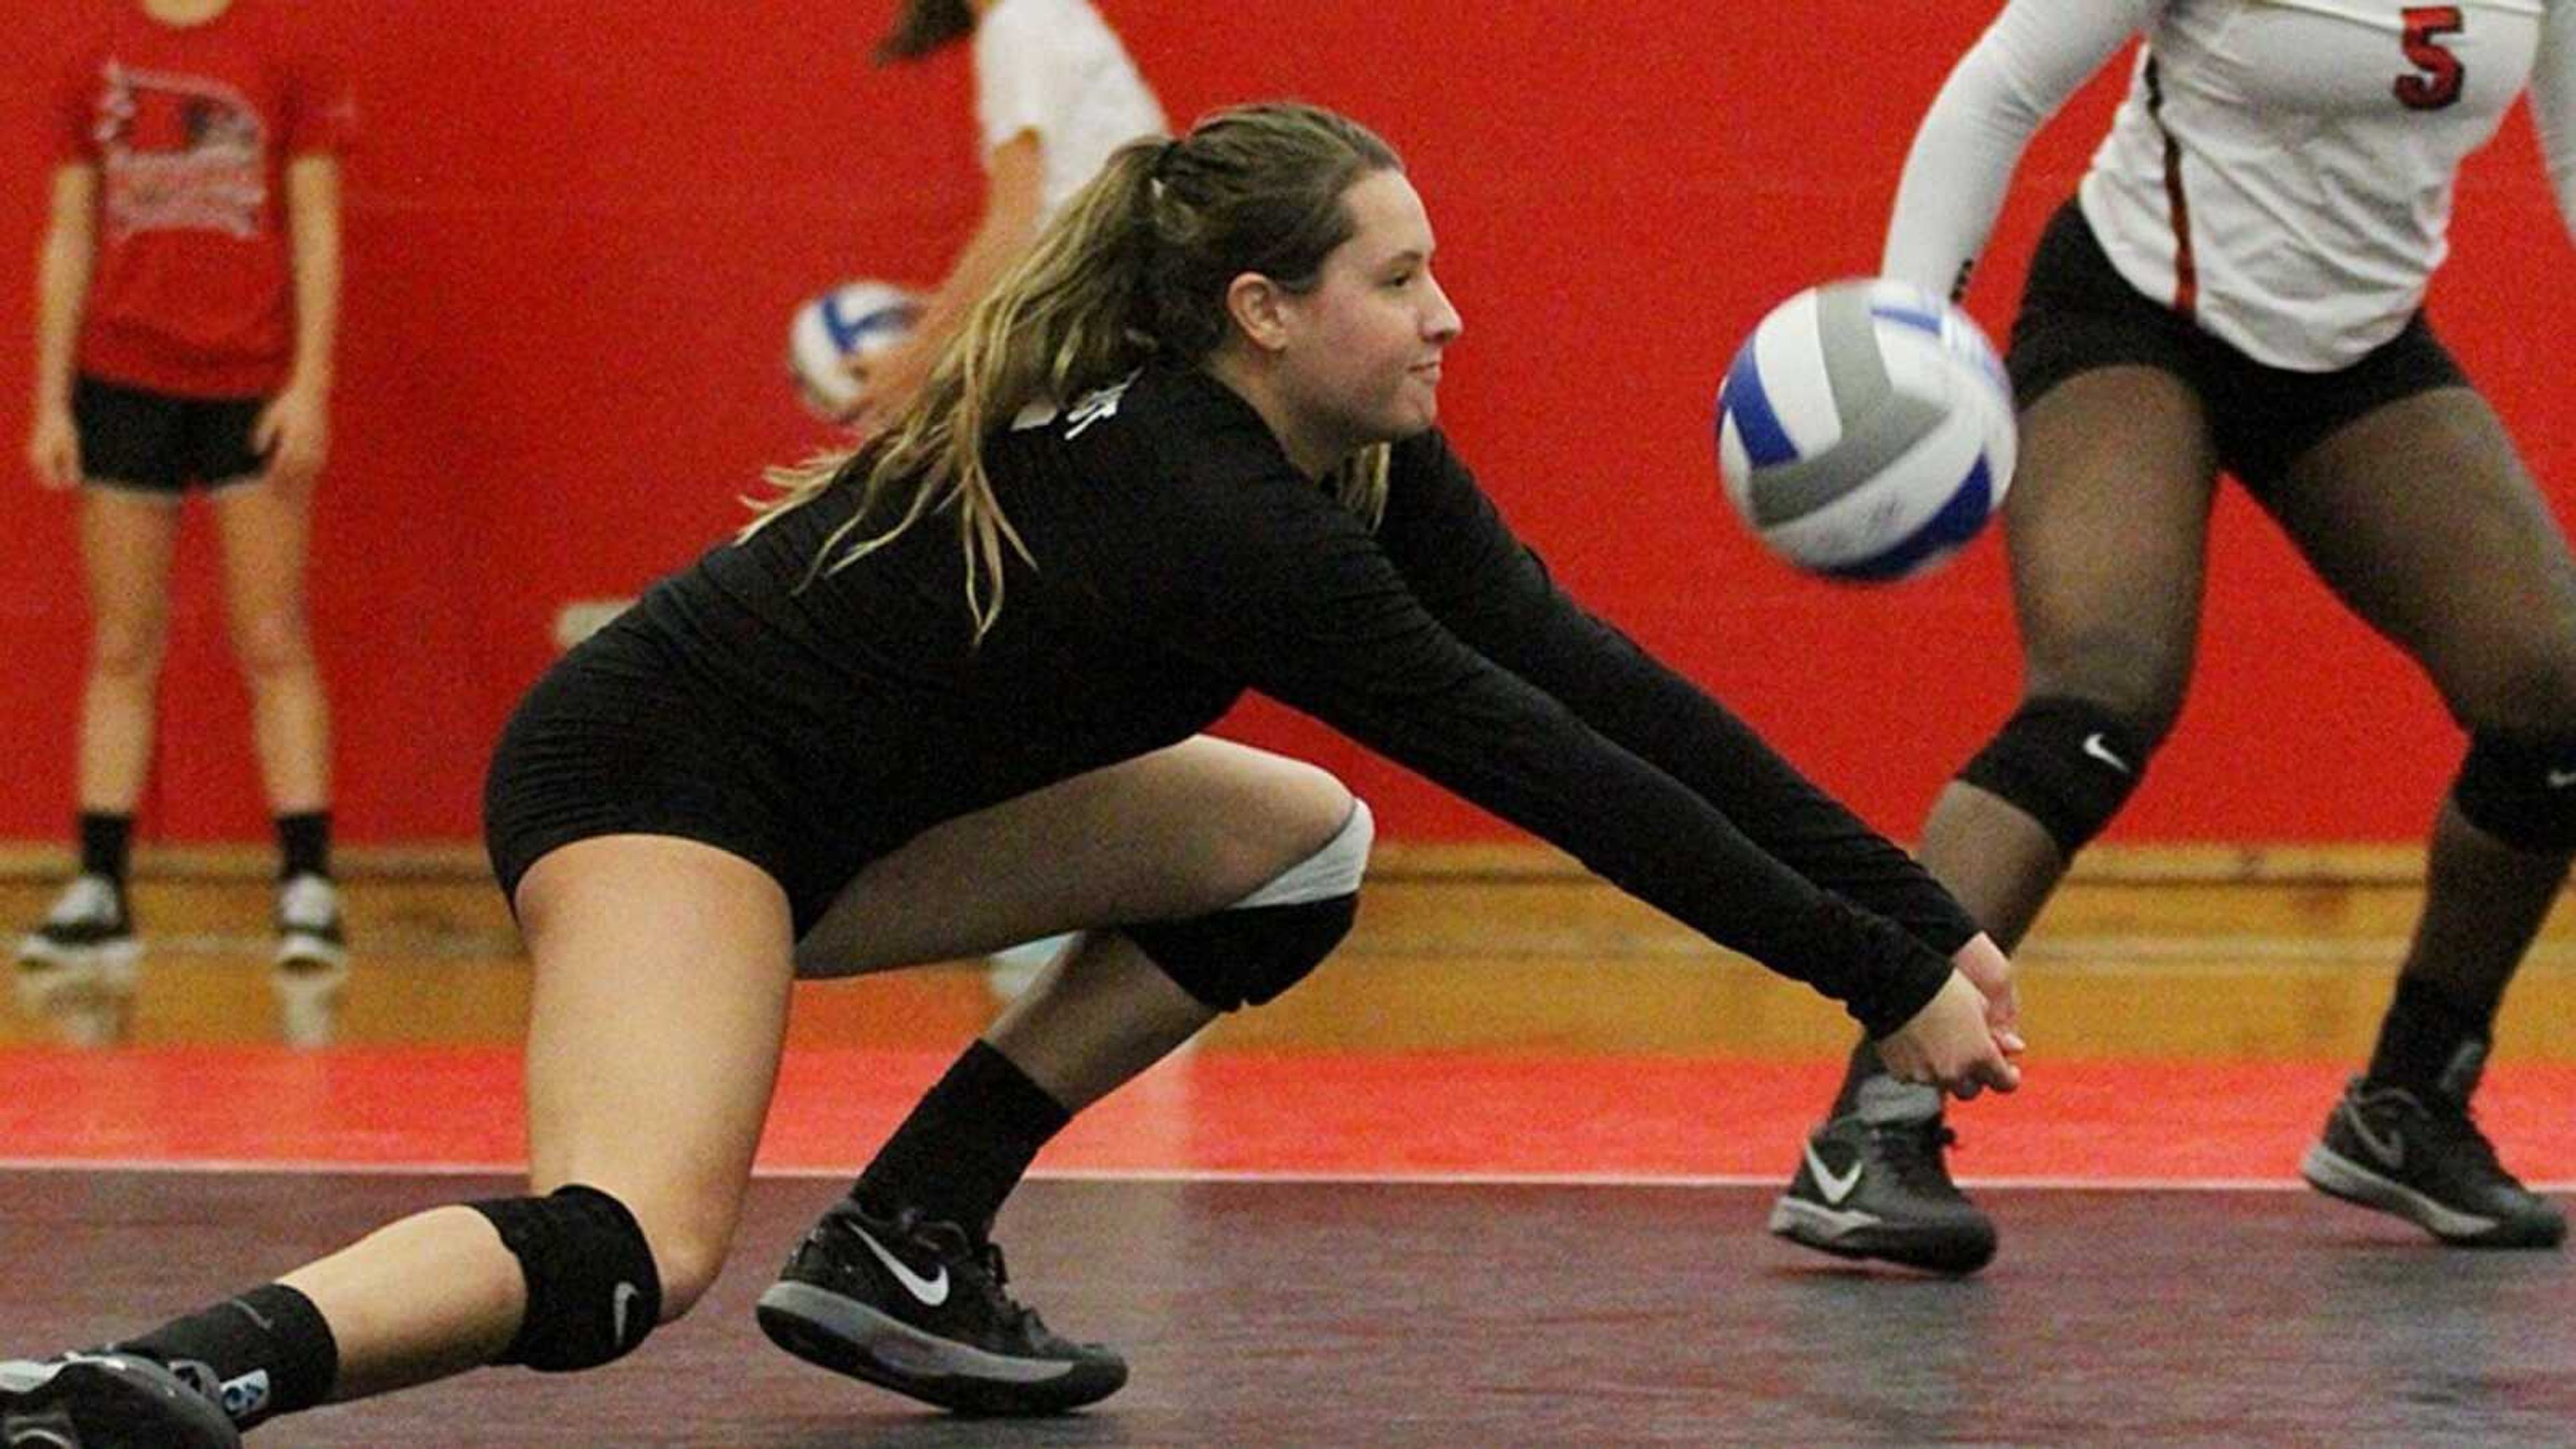 Senior libero Jade Mortimer makes a dig during a game last season. She is slated to be a leader on the women's volleyball team this year. Submitted photo